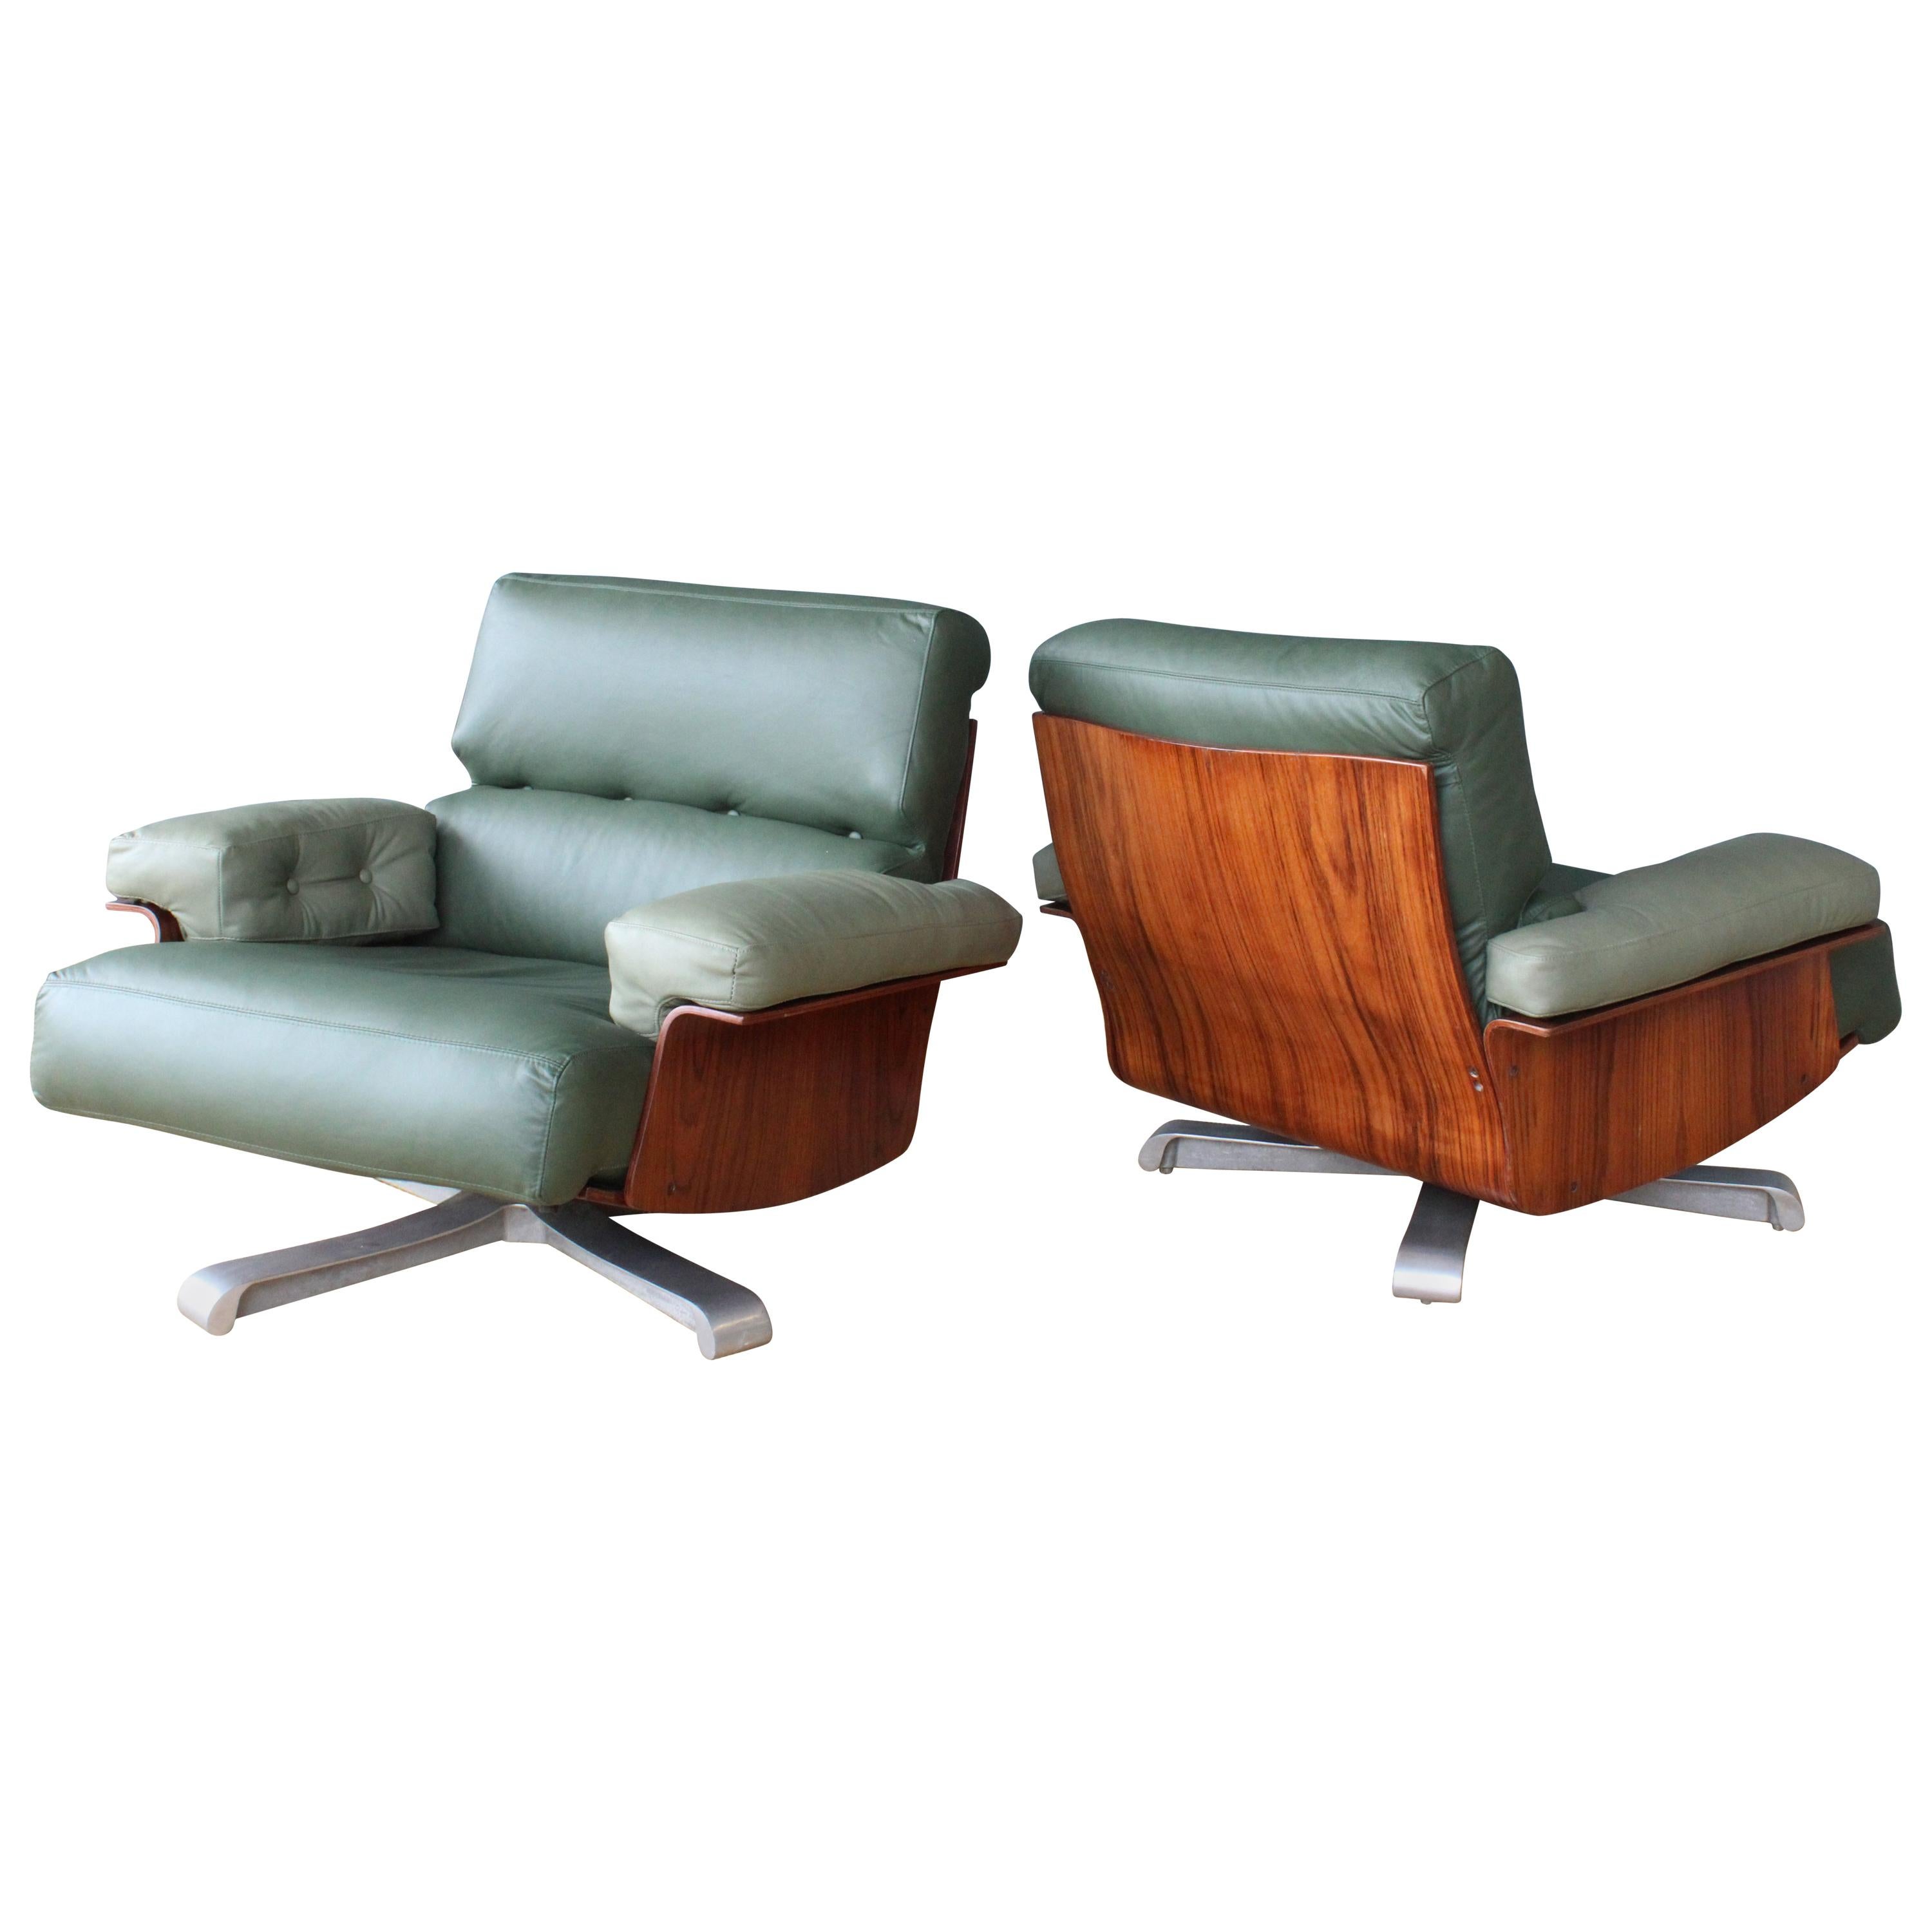 Pair of Brazilian Rosewood Chairs with Leather Upholstery, Brazil, 1960s